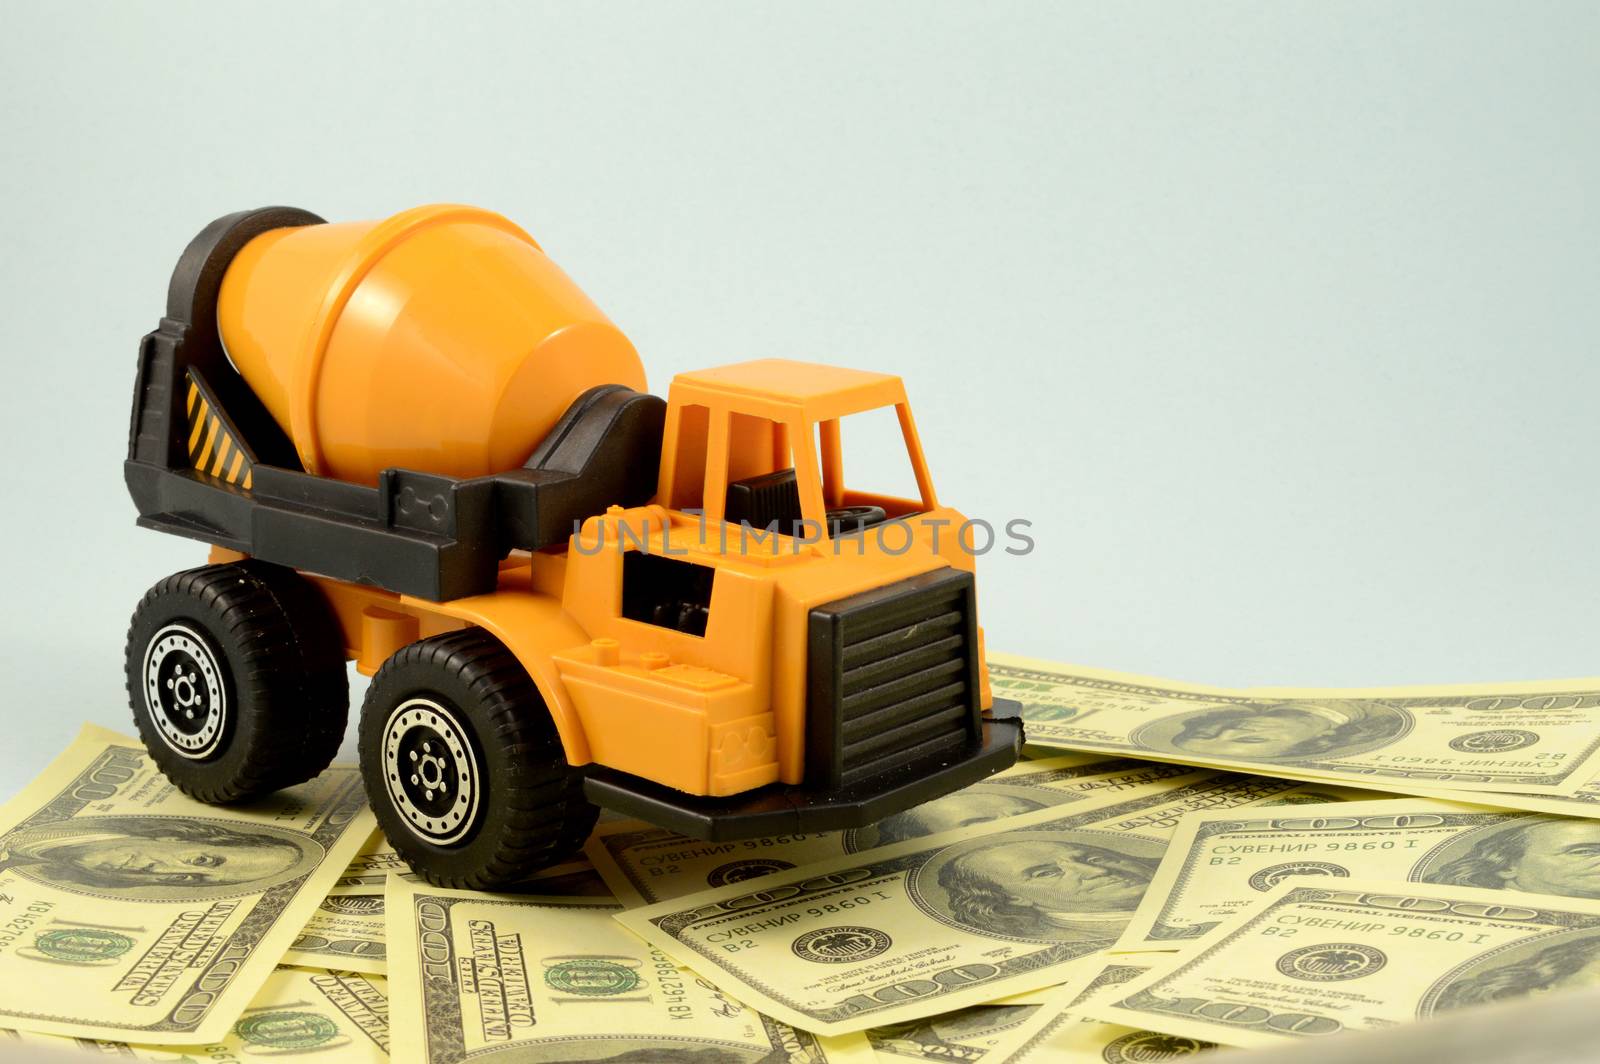 A scale model cement mixer truck over some banknotes for construction concepts.